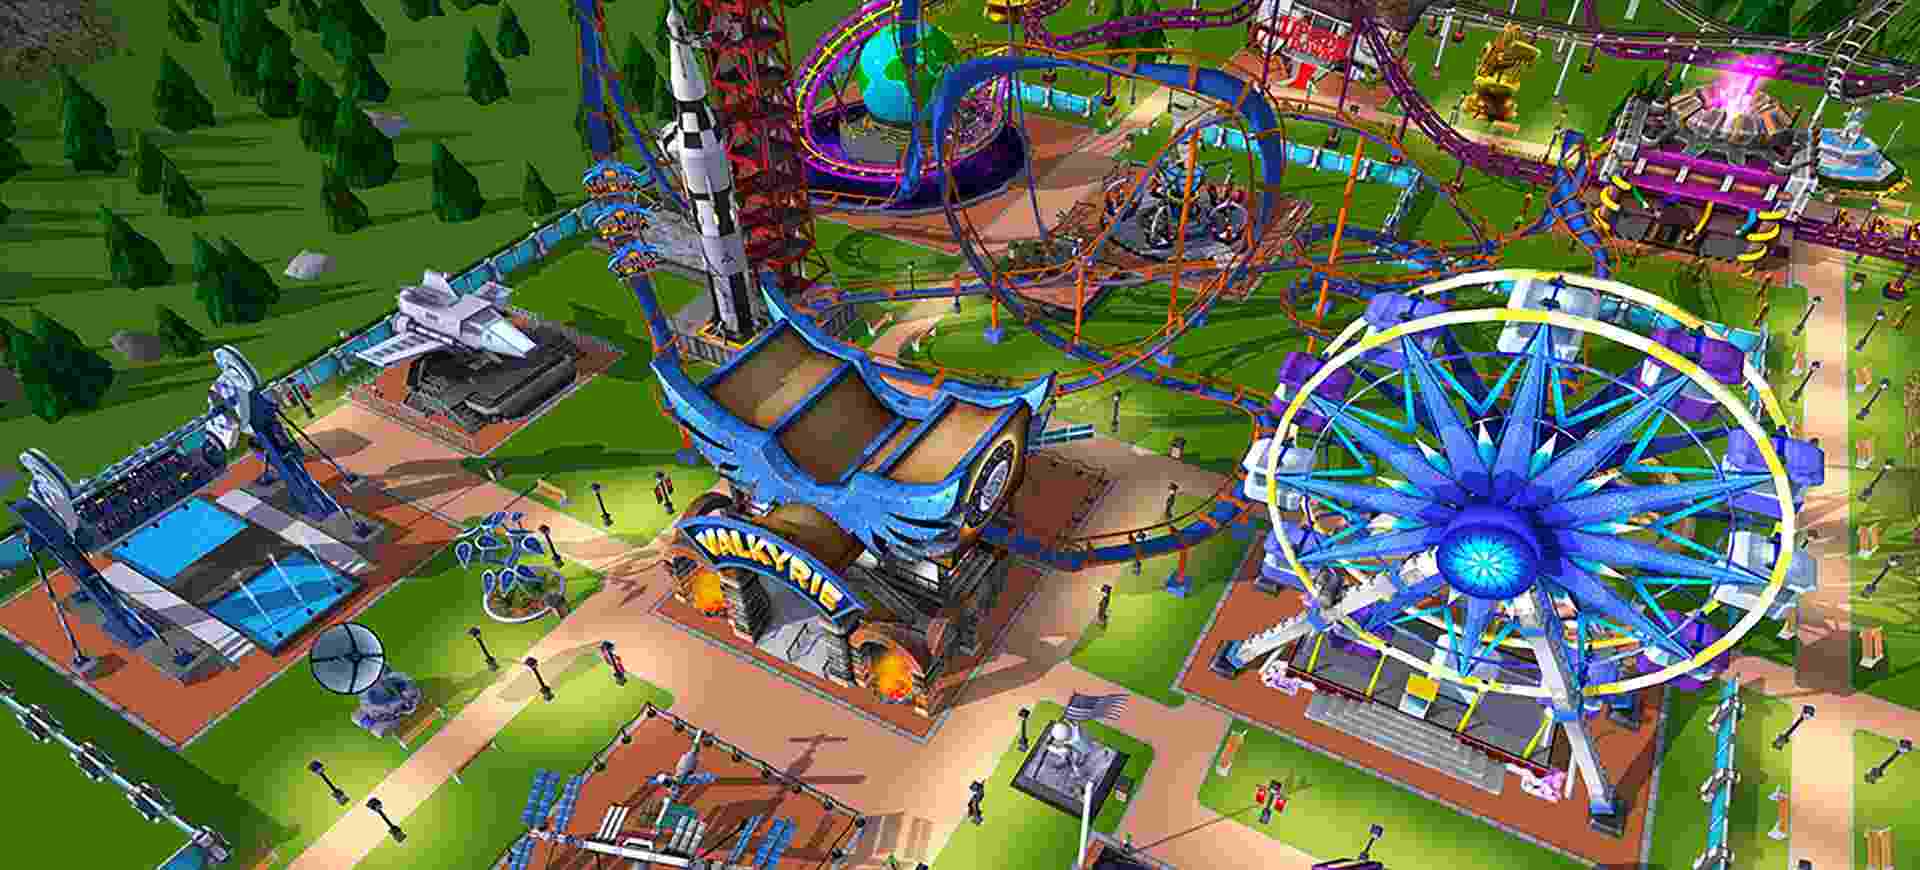 Download RollerCoaster Tycoon Touch Mod